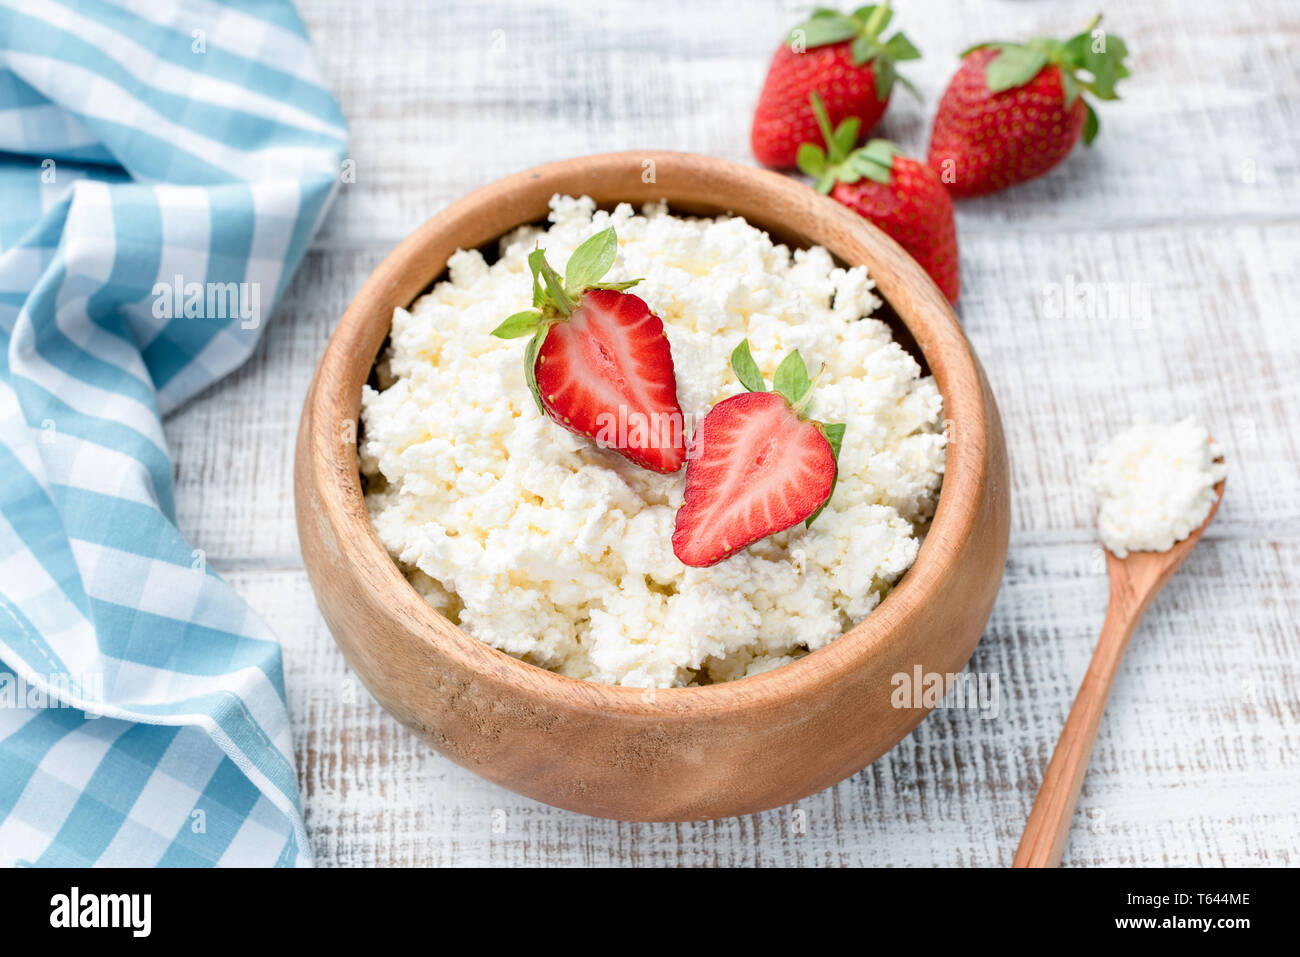 Cottage Cheese Or Curd Cheese In Bowl Rich In Protein And Calcium